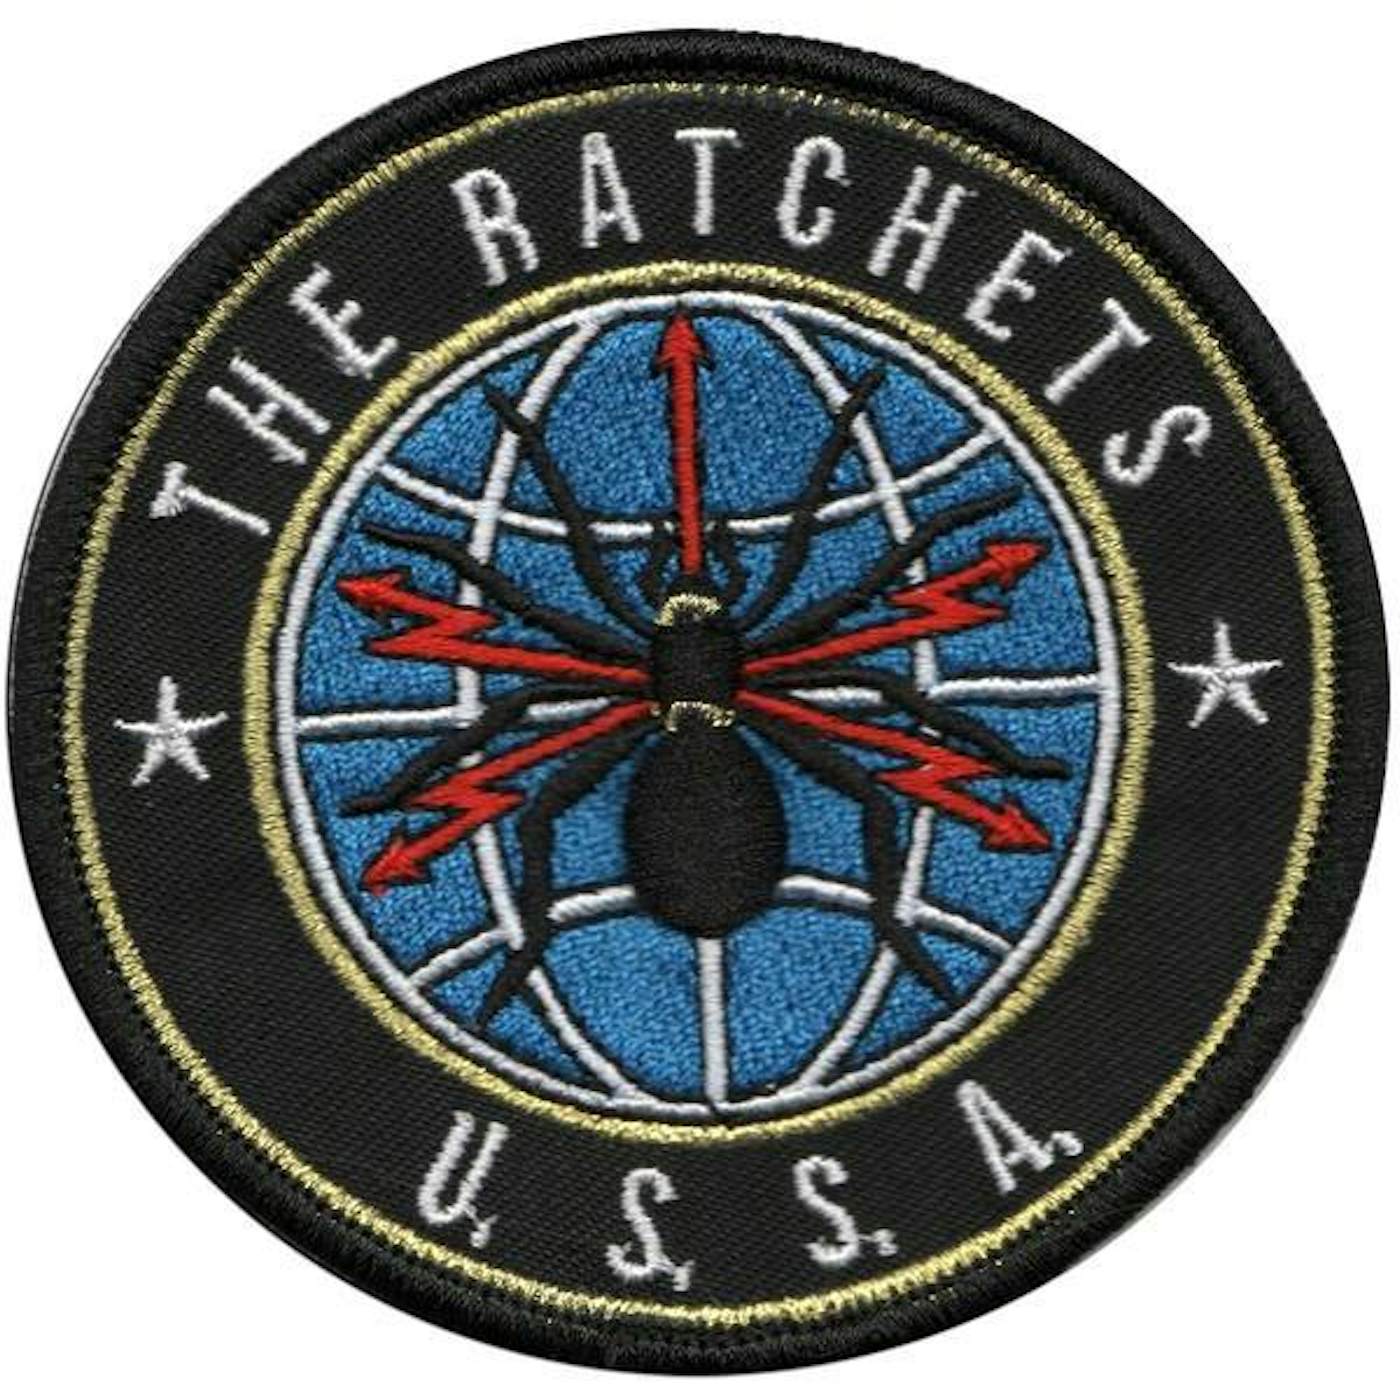 The Ratchets - Spider - Patch - Embroidered - 3.5"